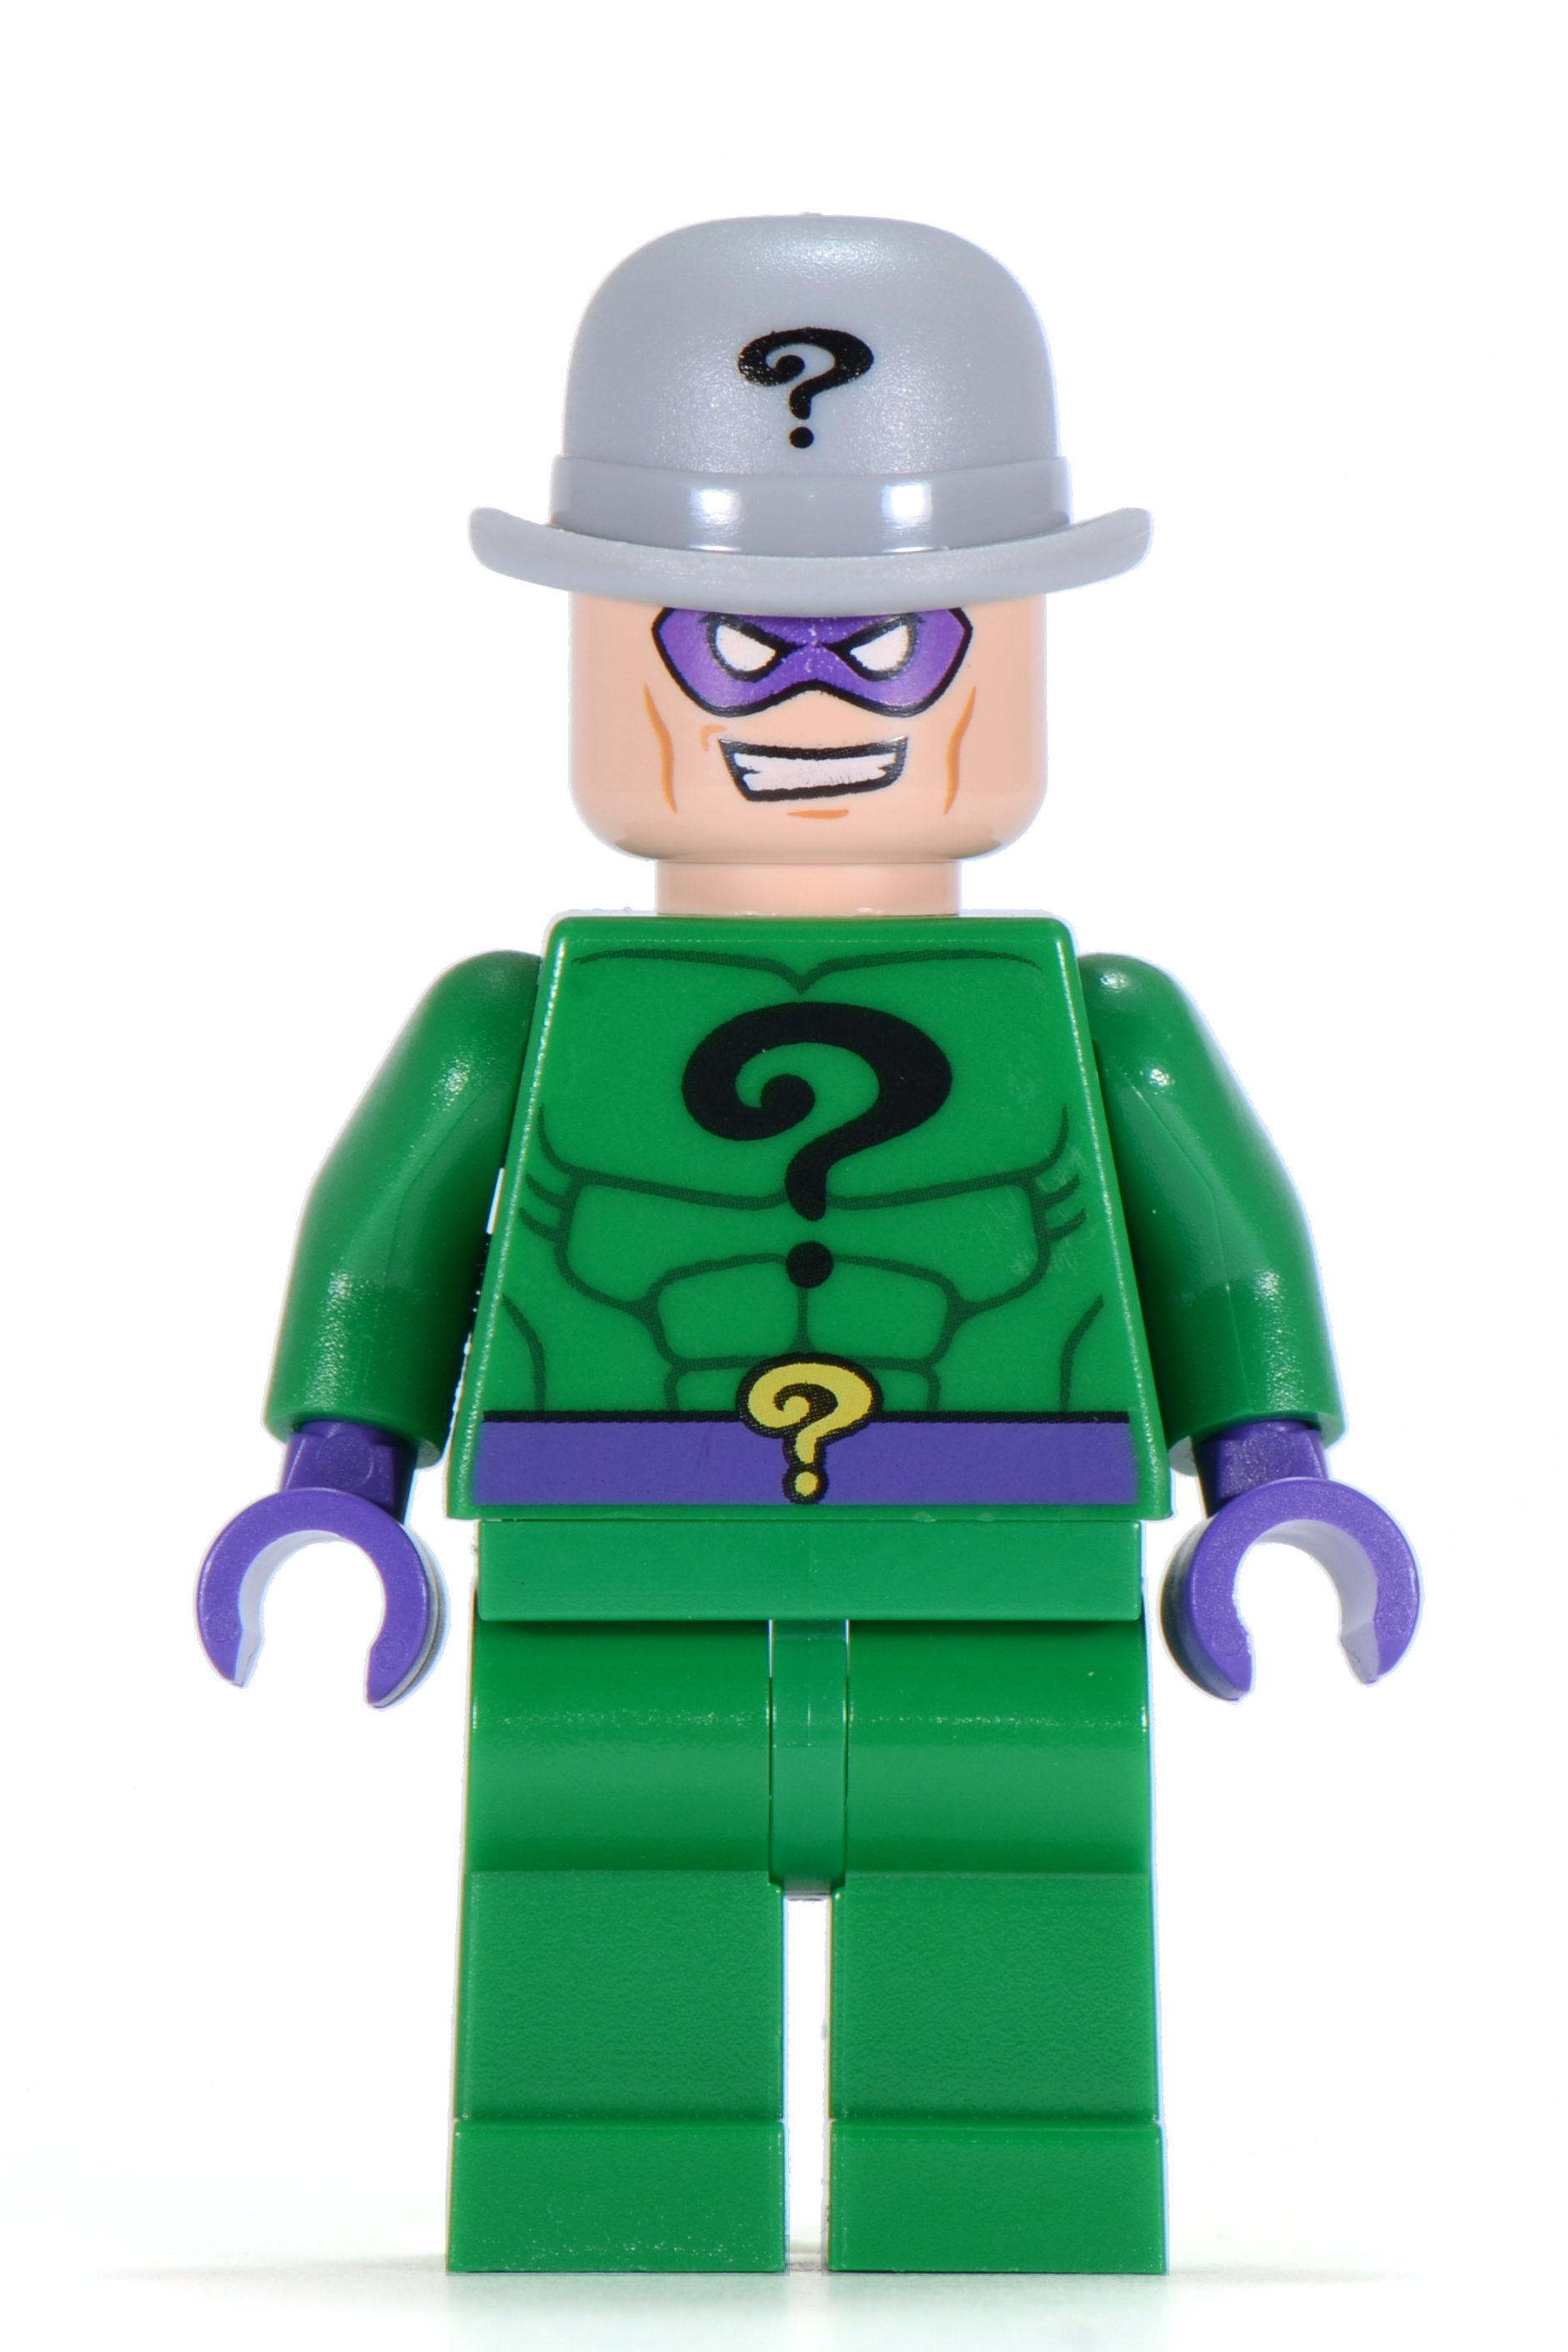 Which character has the most | Brickset: LEGO set guide database